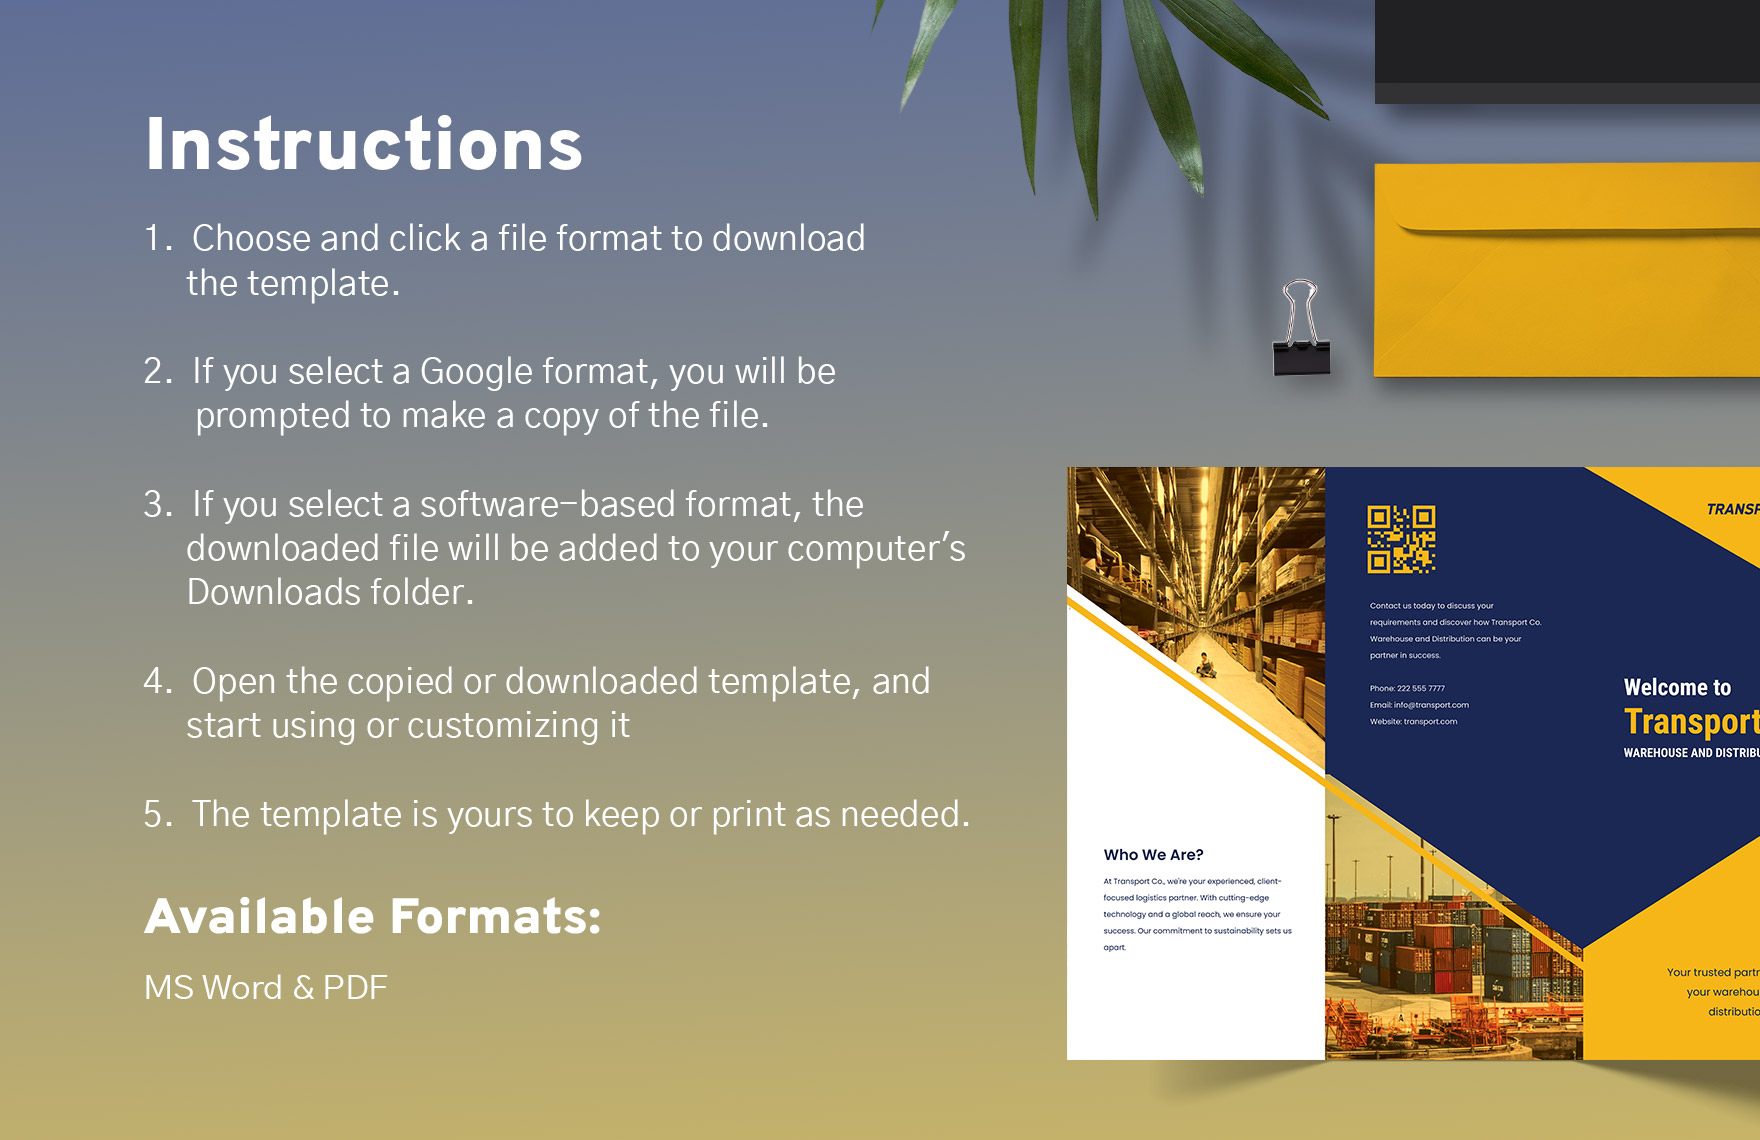 Transport and Logistics Warehouse and Distribution Brochure Template